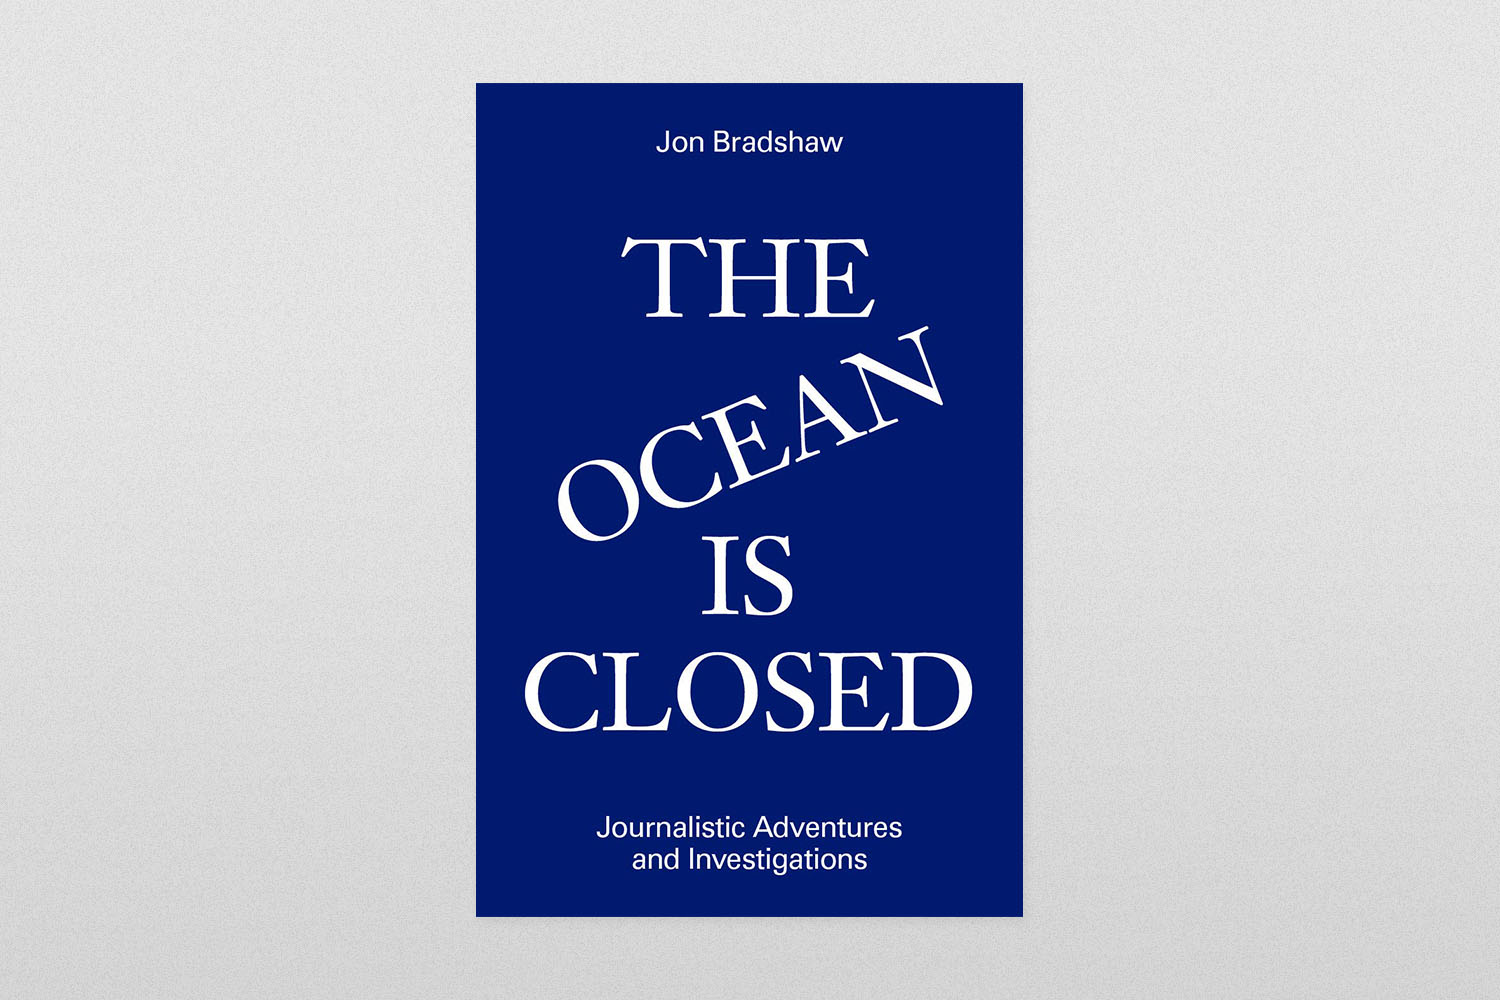 "The Ocean is Closed"